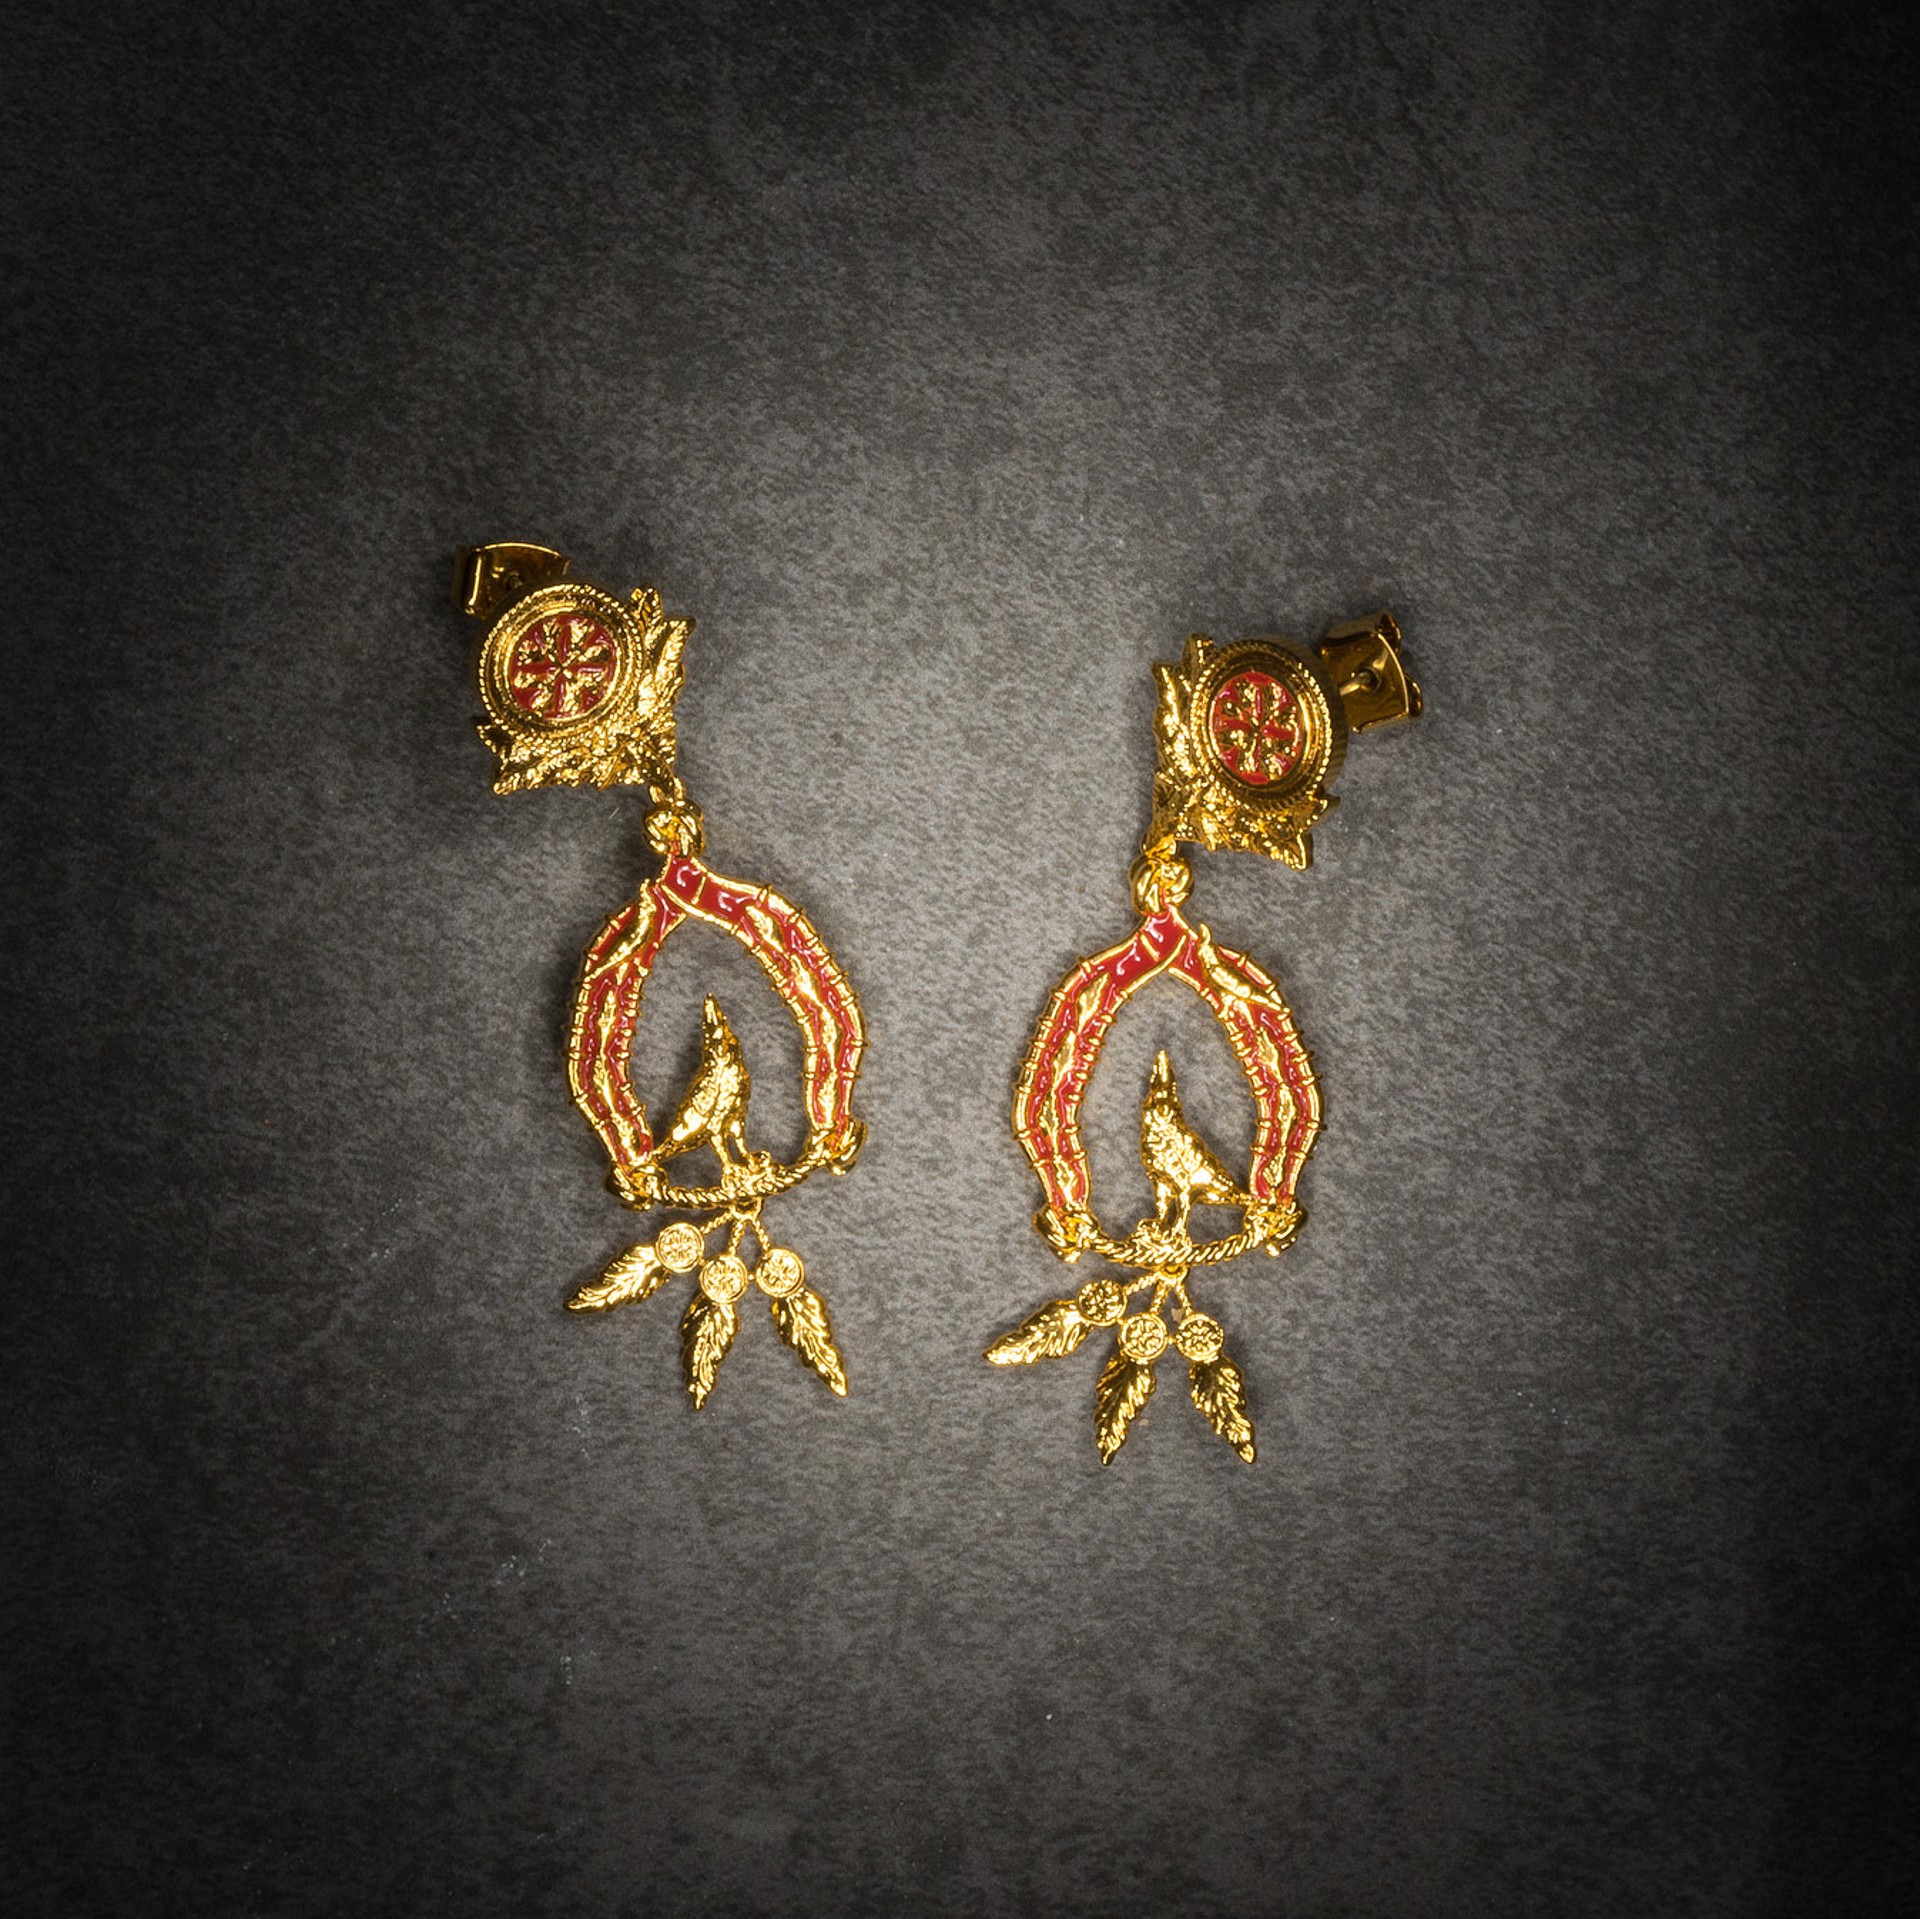 Vigor Earrings with Feathers - Gold & Red by Angela Mia